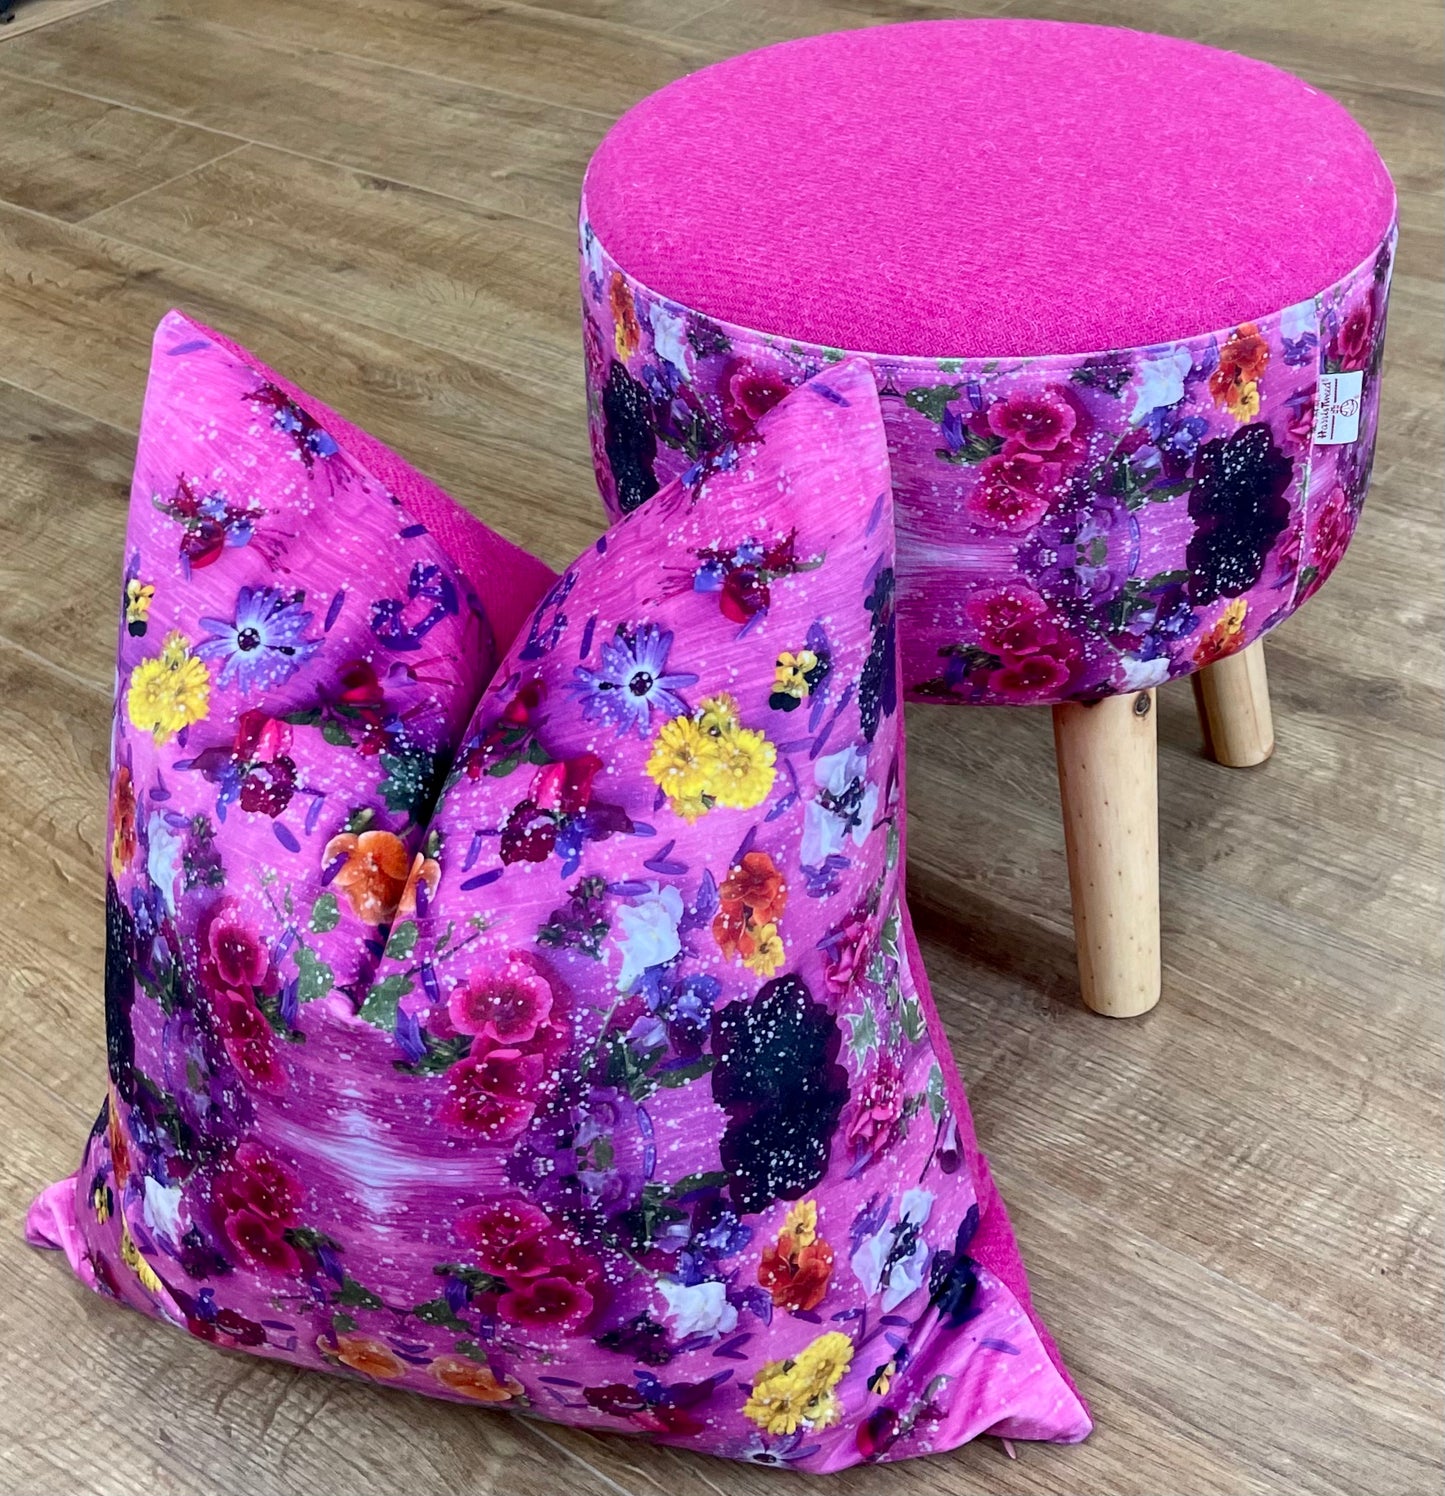 Pink Floral Velvet and Harris Tweed Upholstered Footstool with Light Rustic Wooden Legs.